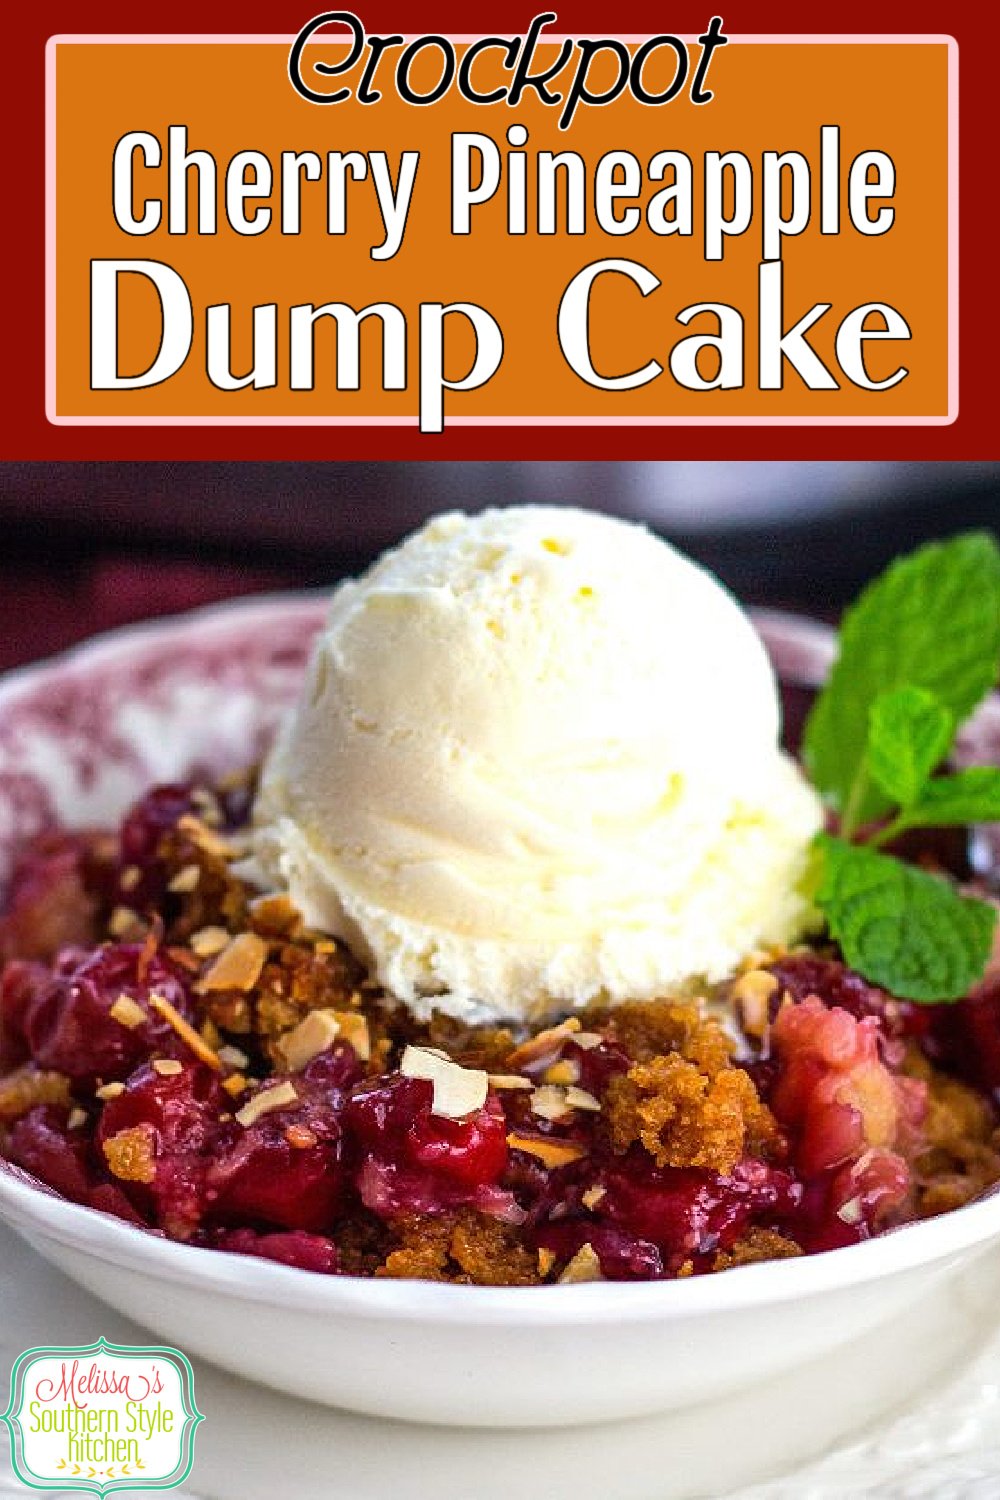 Crockpot Cherry Pineapple Dump Cake can be served straight from the crockpot with a sprinkling of toasted almonds and vanilla ice cream #dumpcakes #dumpcakerecipe #cakes #cakerecipes #easydesserts #crockpotdumpcake #cherrydumpcake #pineappledumpcake #cherrypineappledumpcake #slowcookeddumpcake via @melissasssk